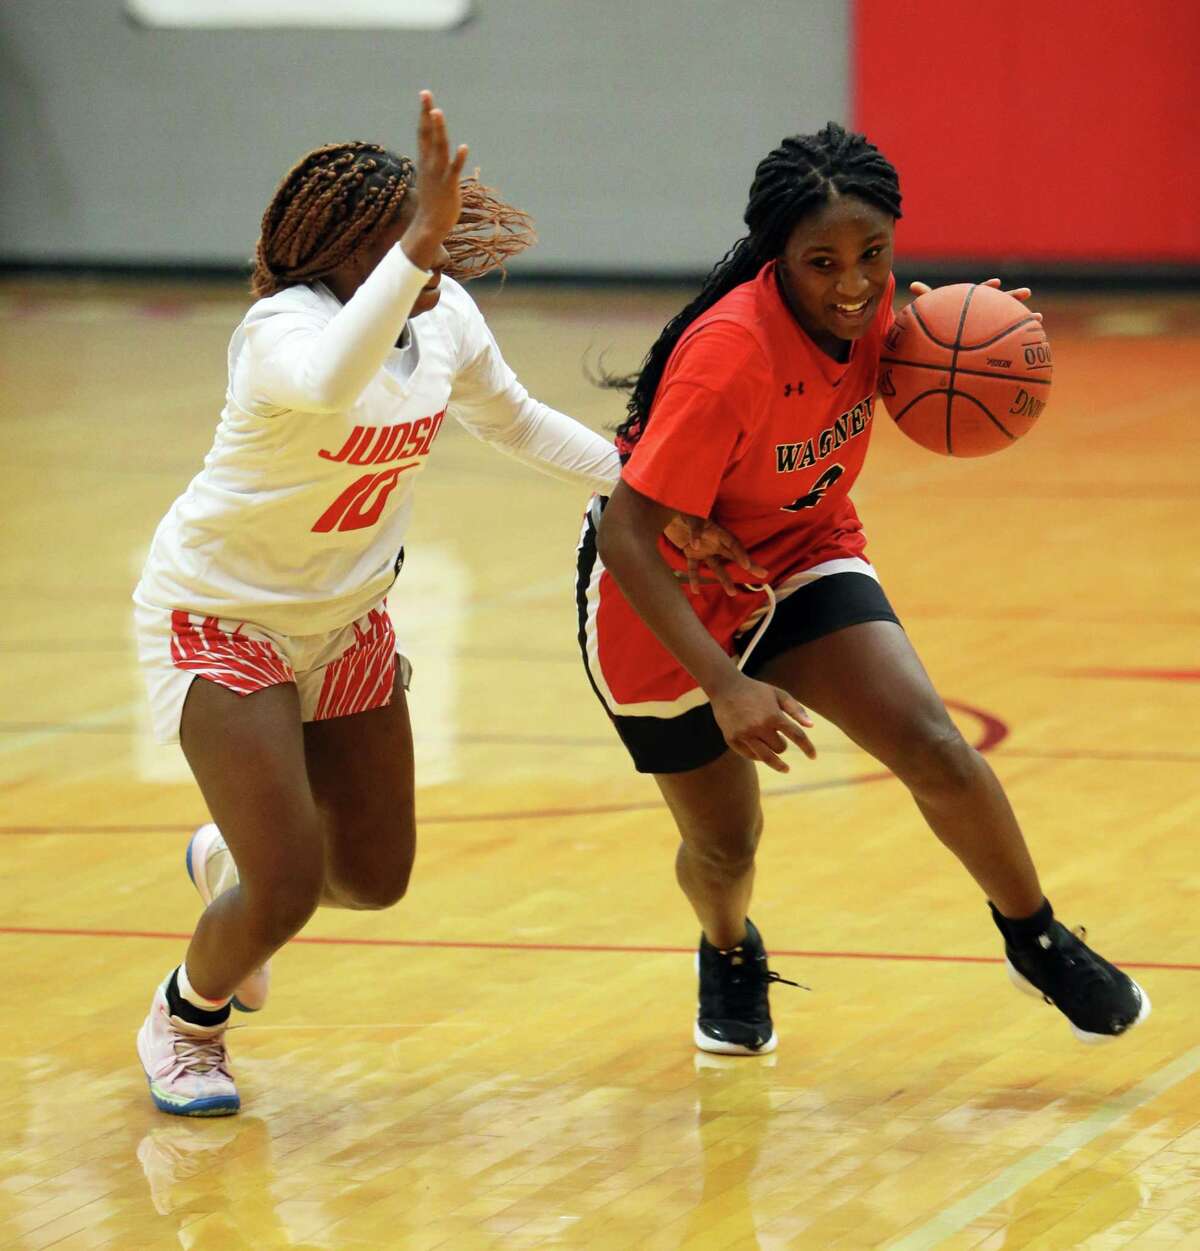 Wagner freshman LA Sneed (2) drives to the basket during the 6A UIL basketball game against Wagner Friday, Jan. 21, 2022, at the Judson High School in Converse, Texas. [Sam Grenadier/San Antonio Express-News]